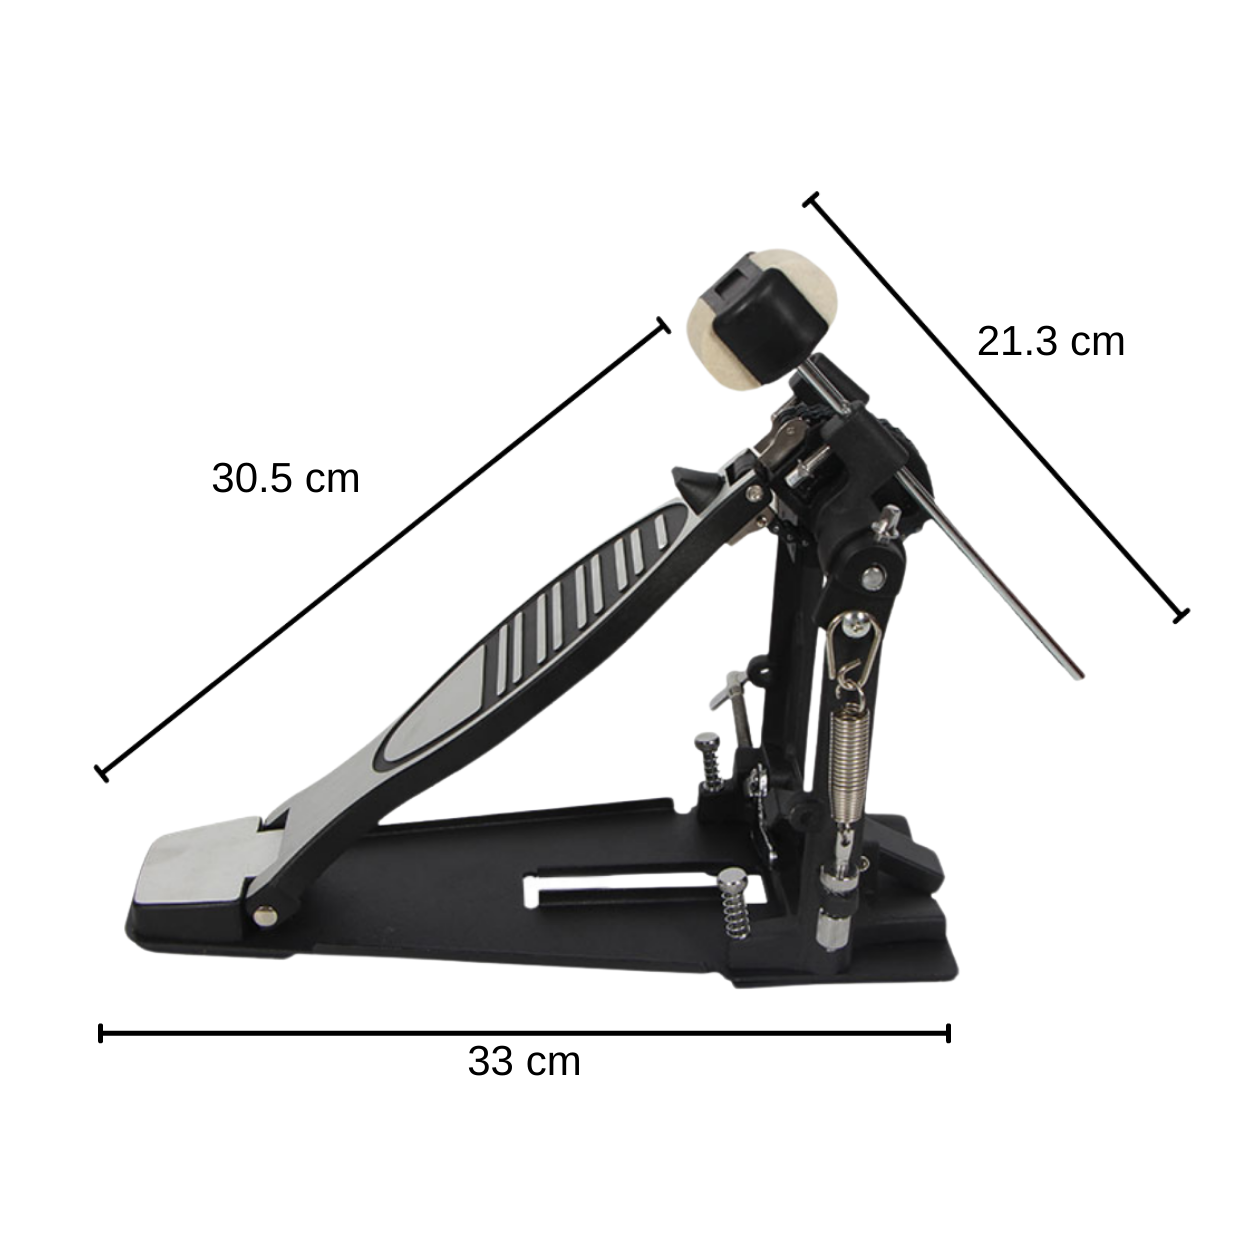 NEOWOOD G710 DRUM DOUBLE PEDAL, NEOWOOD, DRUM HARDWARE, neowood-drum-hardware-neo-g710, ZOSO MUSIC SDN BHD